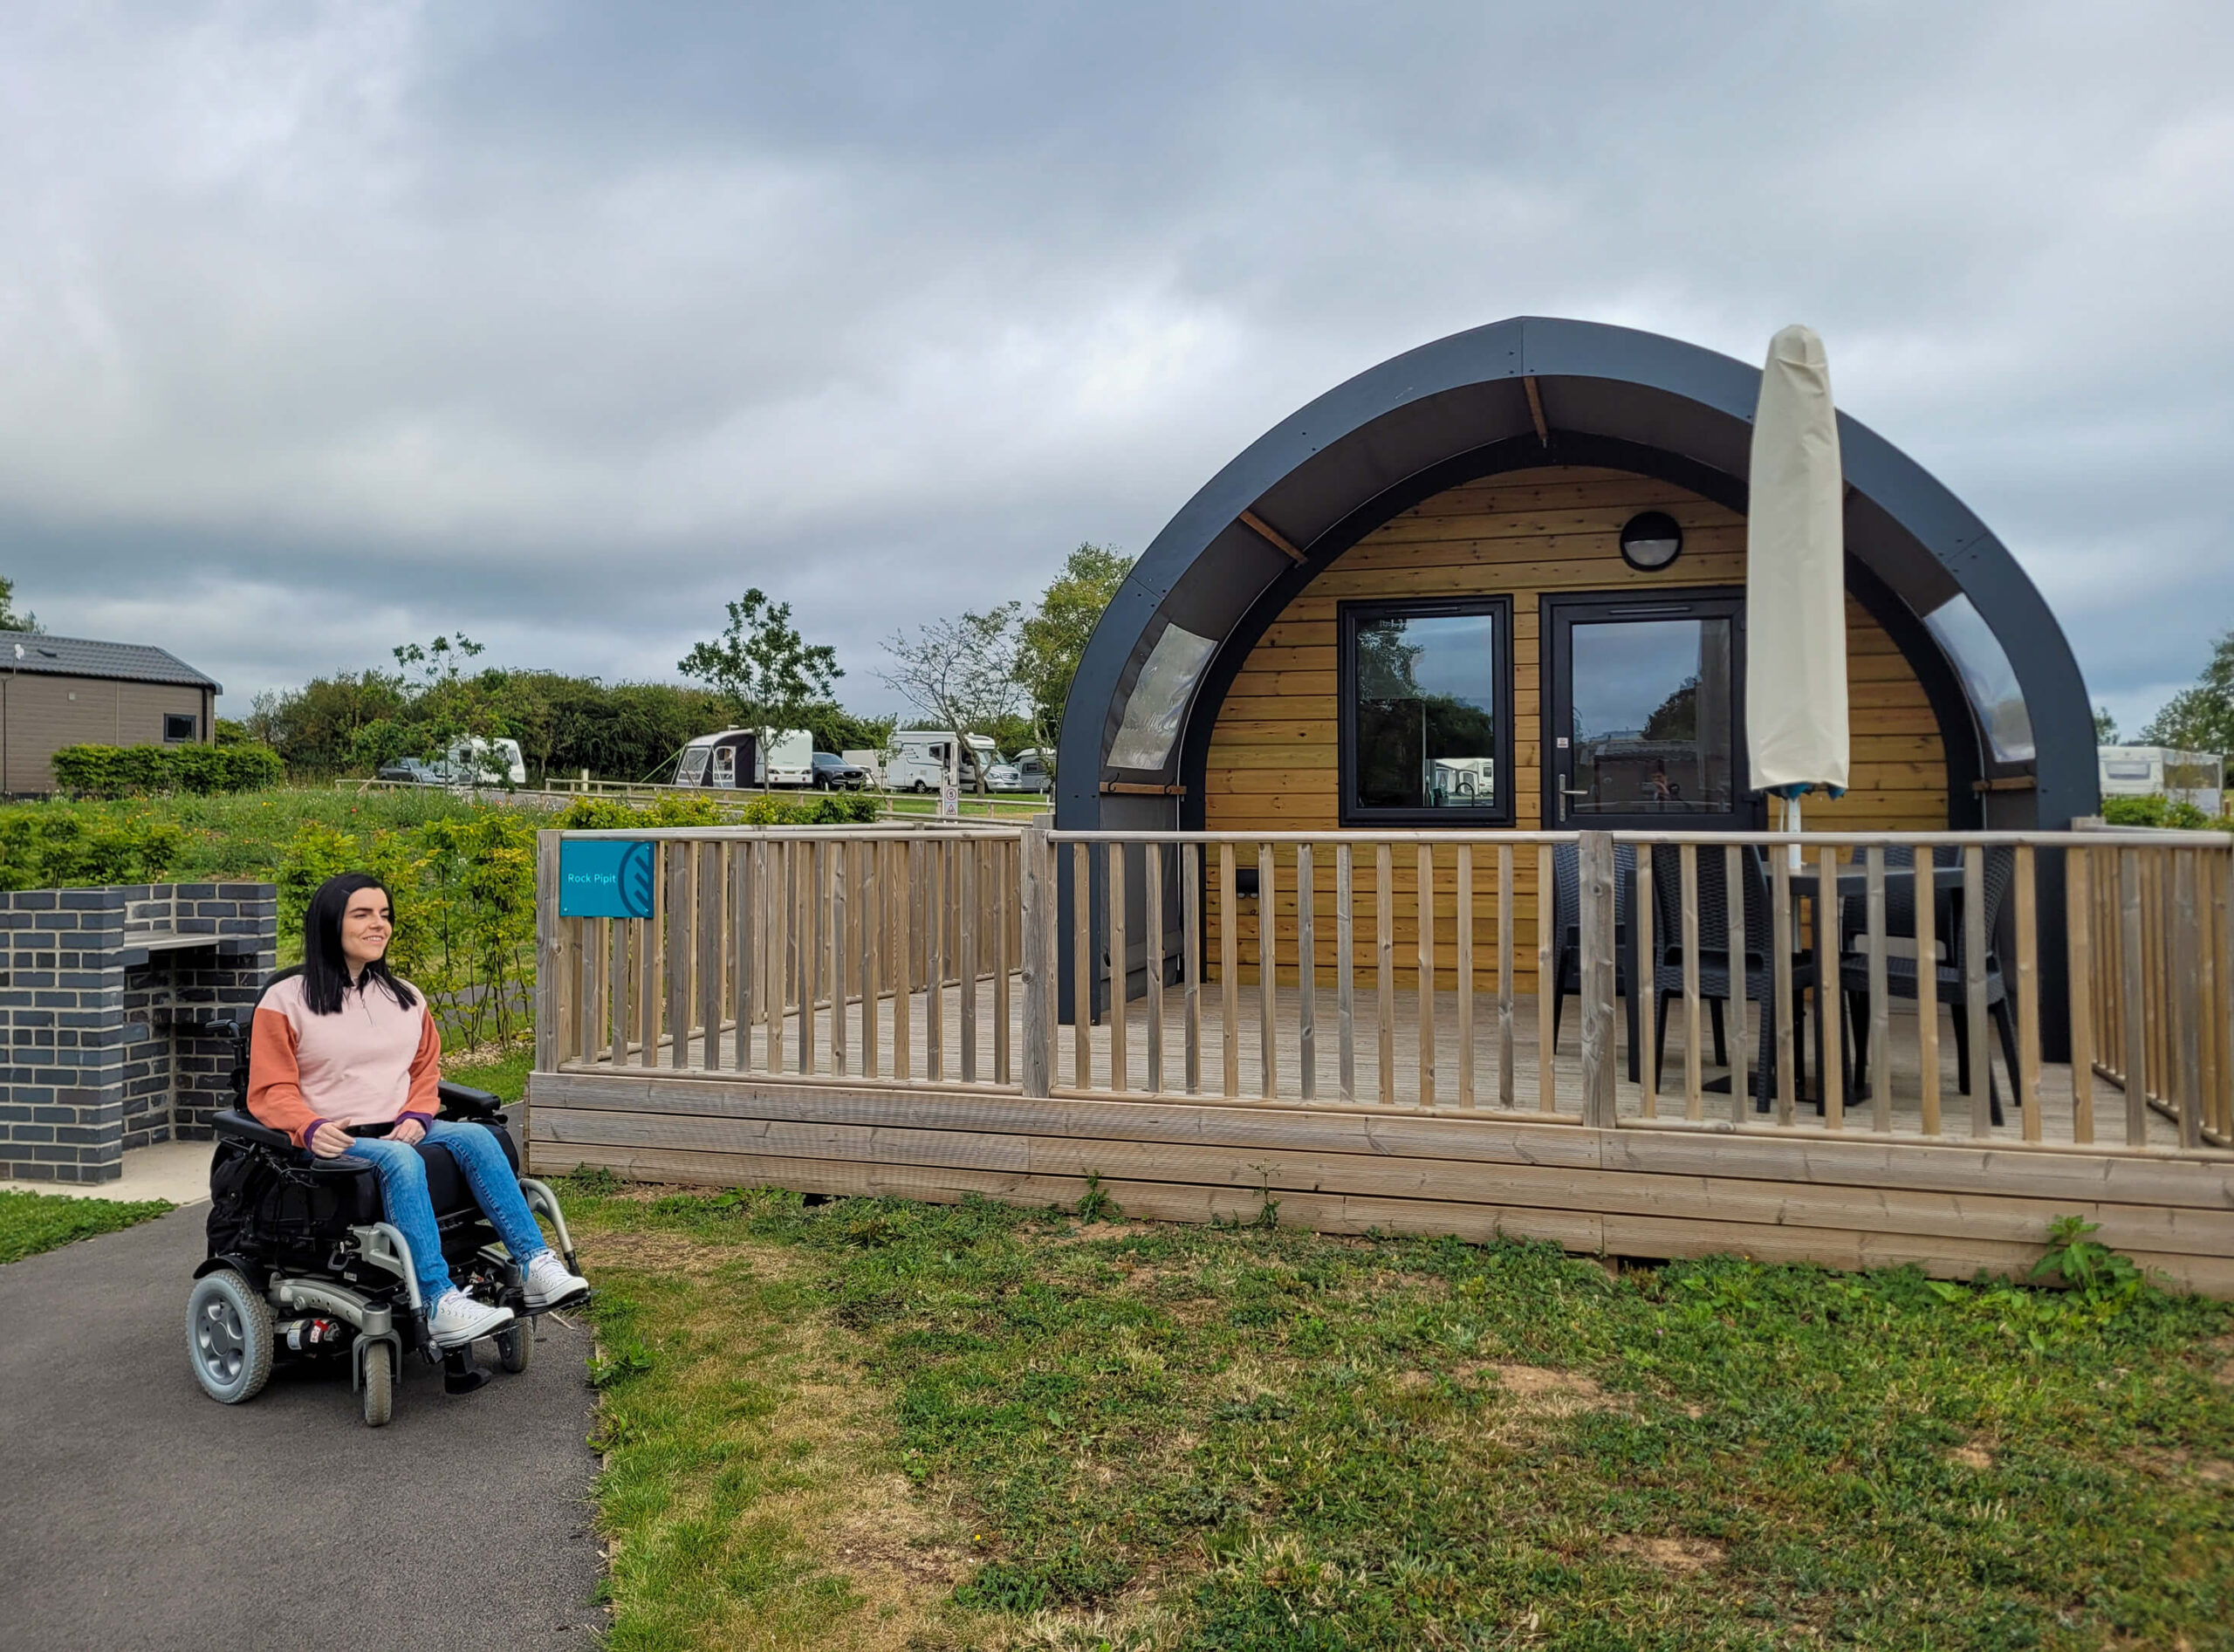 Emma sat in her wheelchair outside next to the wheelchair accessible glamping pod at Cayton Village.